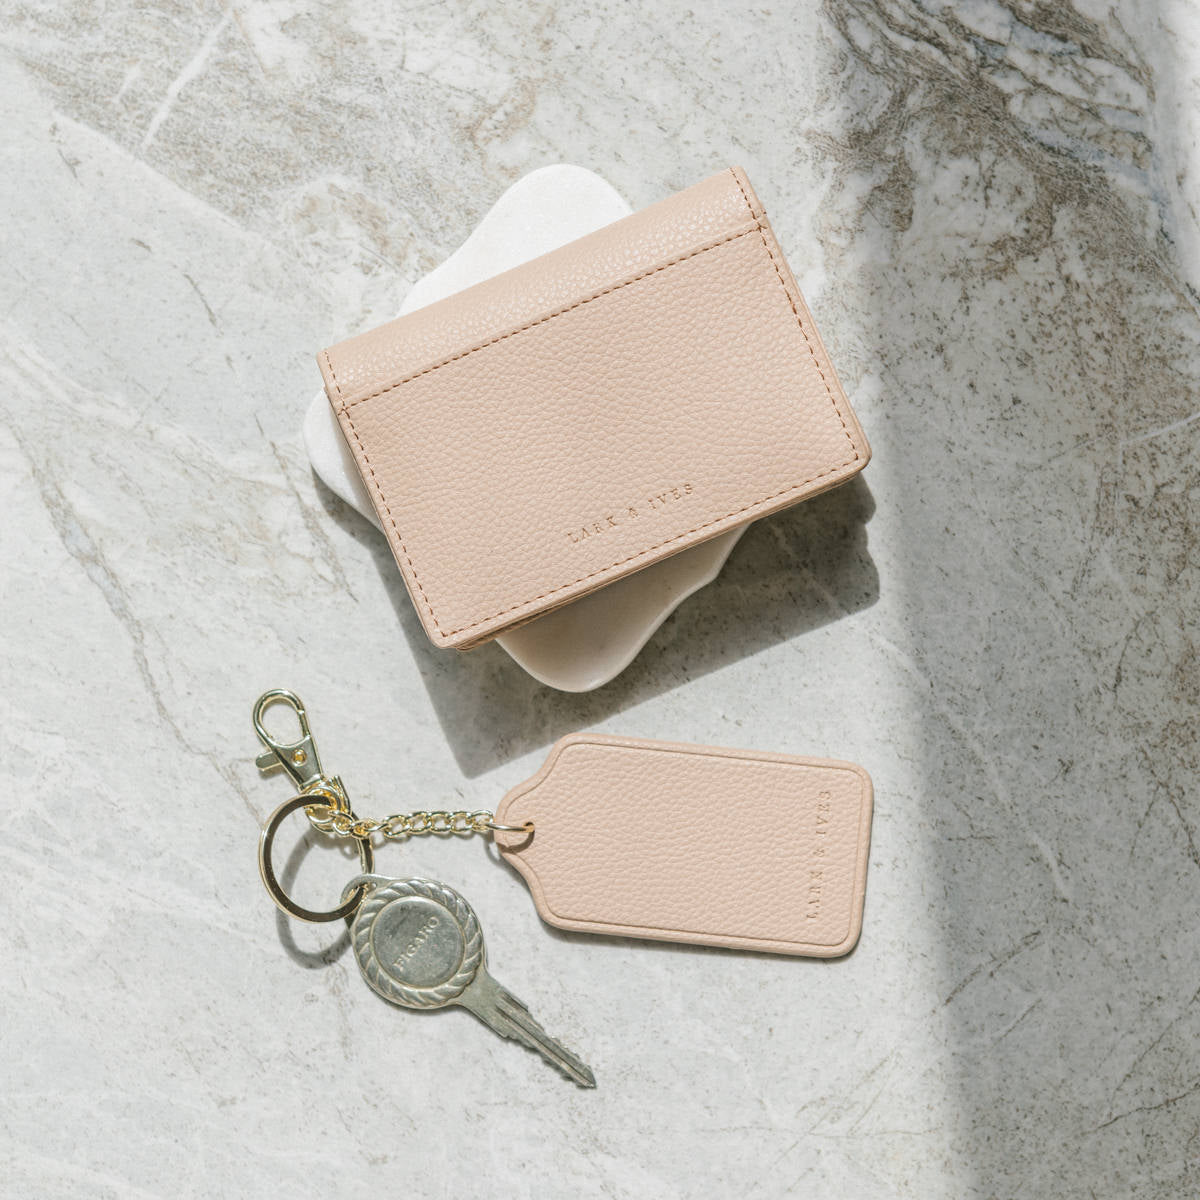 Lark and Ives / Vegan Leather Accessories / Small Accessories / Wallet / Mini Wallet / Card Case / Card Holder / Button snap closure / Fold Wallet / Tag Keychain / Keychain / Key Holder / Nude Pink Card Case and Keychain